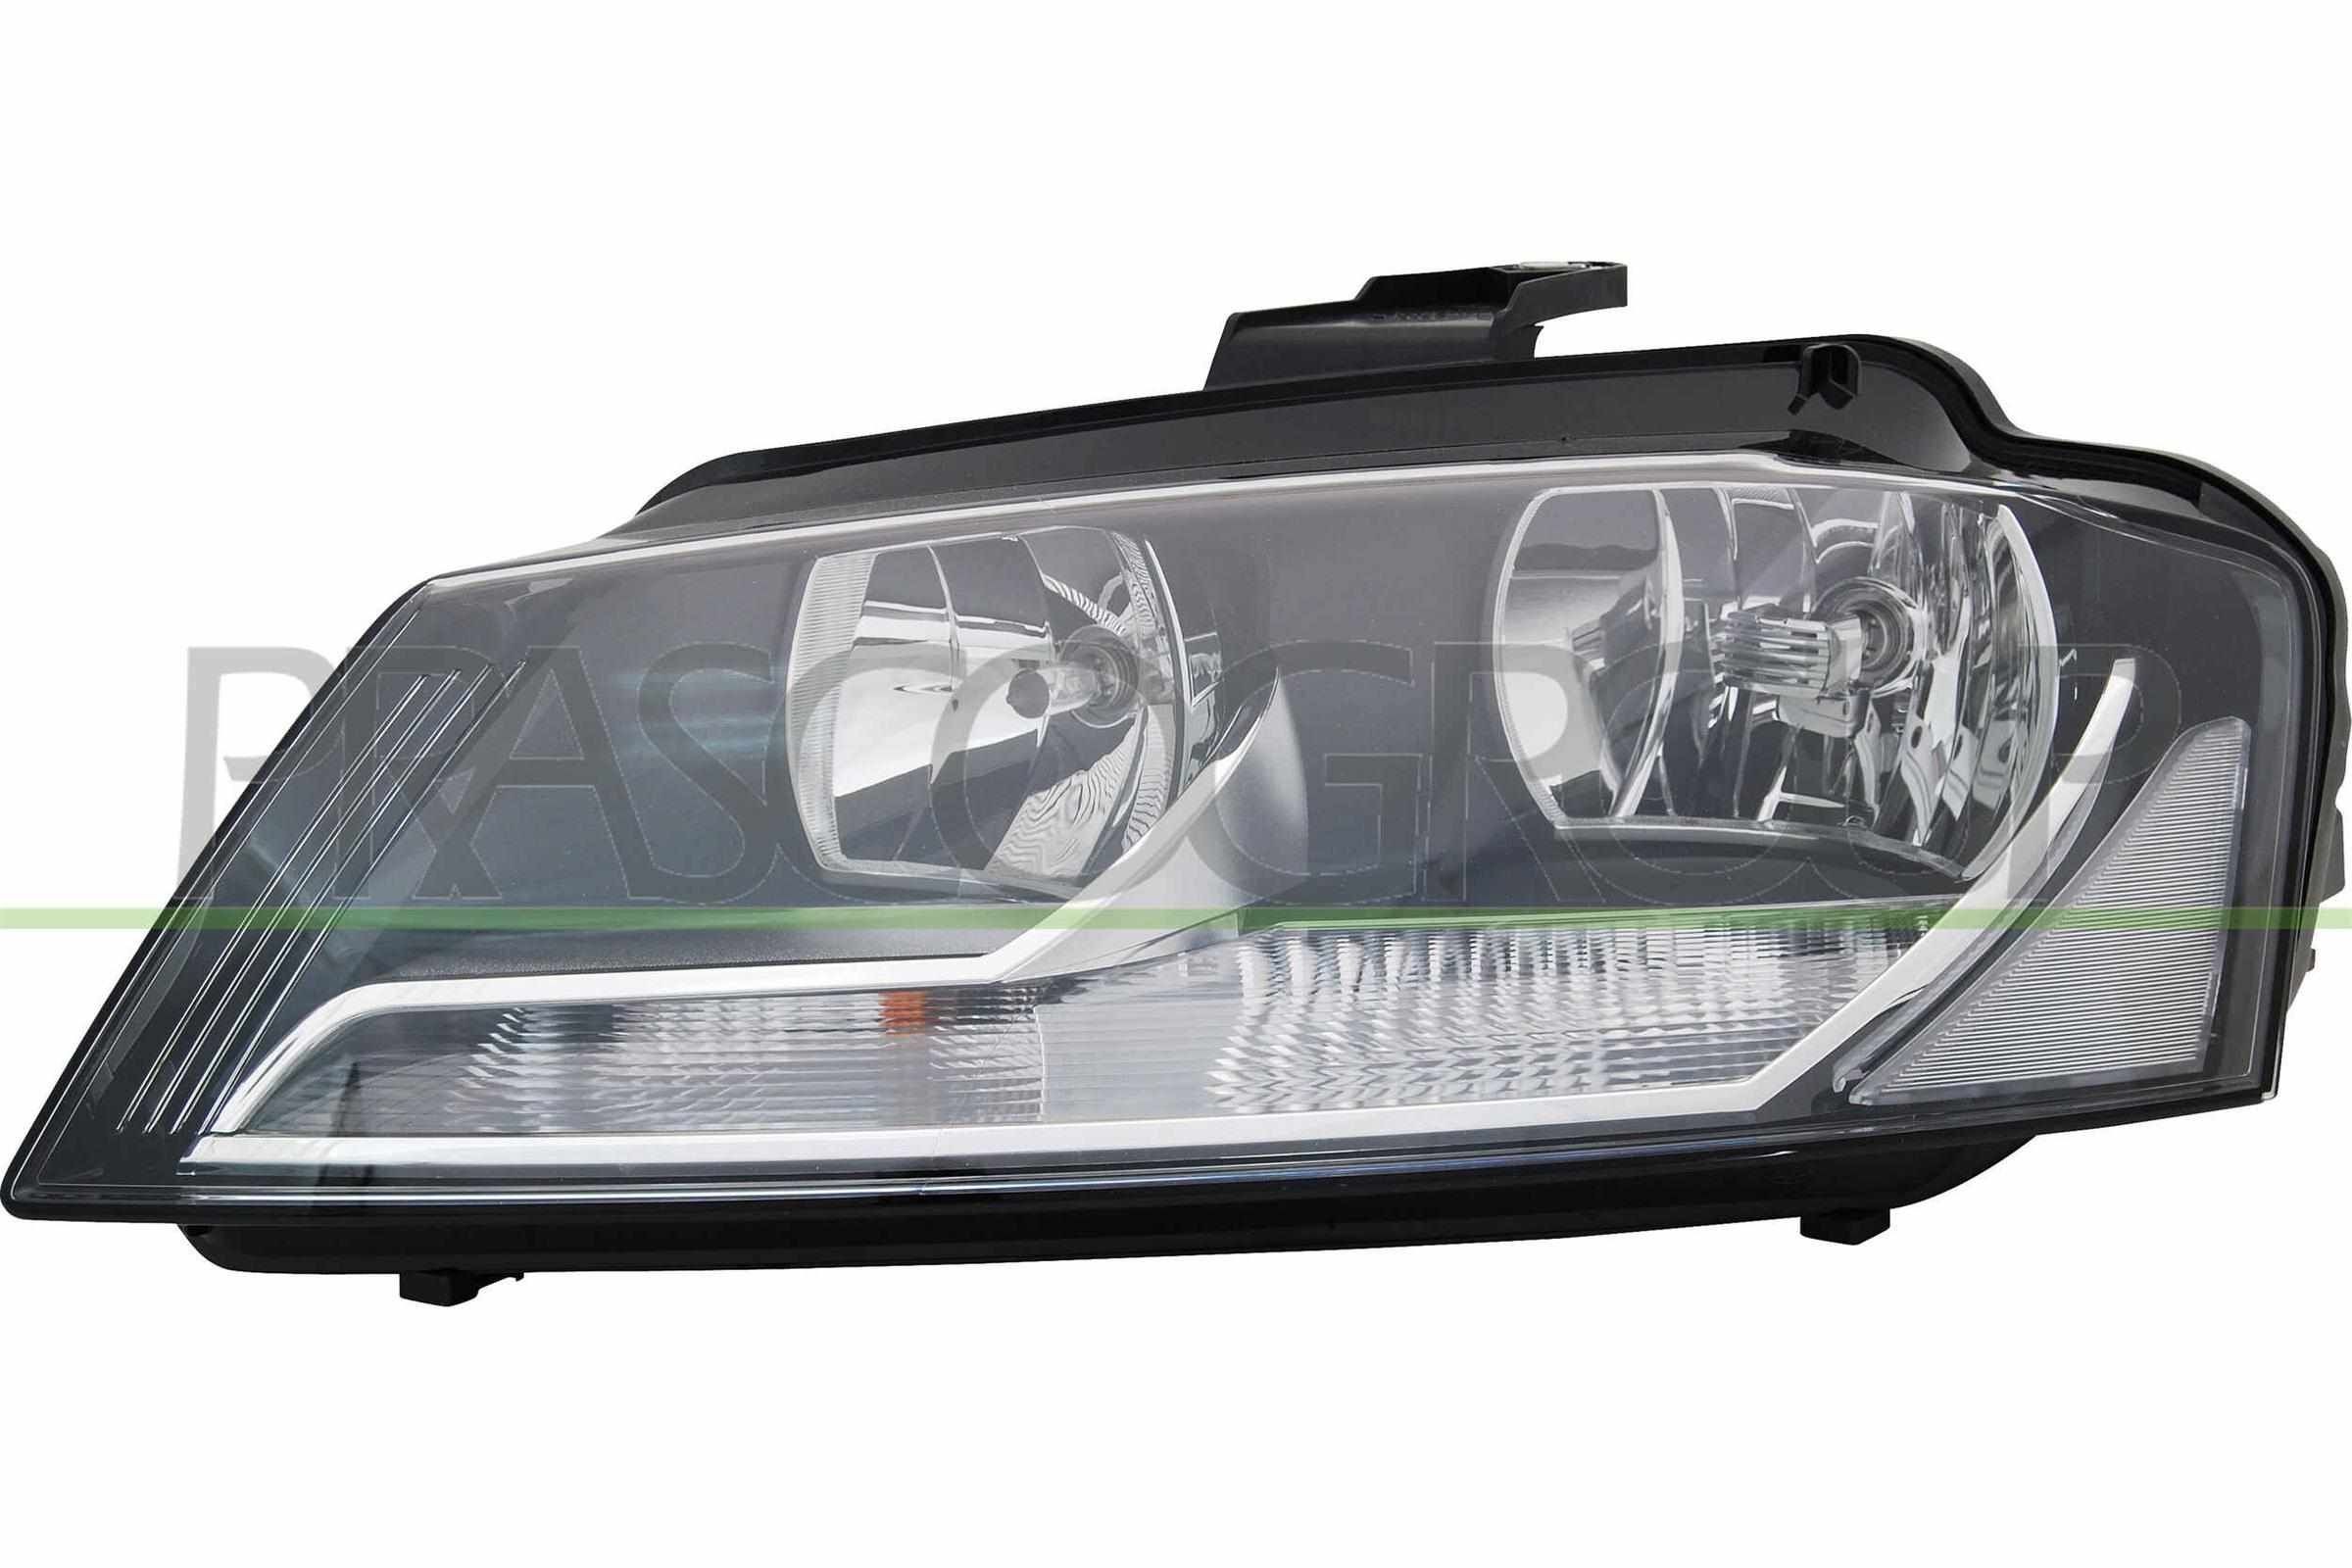 PRASCO AD3224903 Headlight Right, H7/H7, with daytime running light, with motor for headlamp levelling